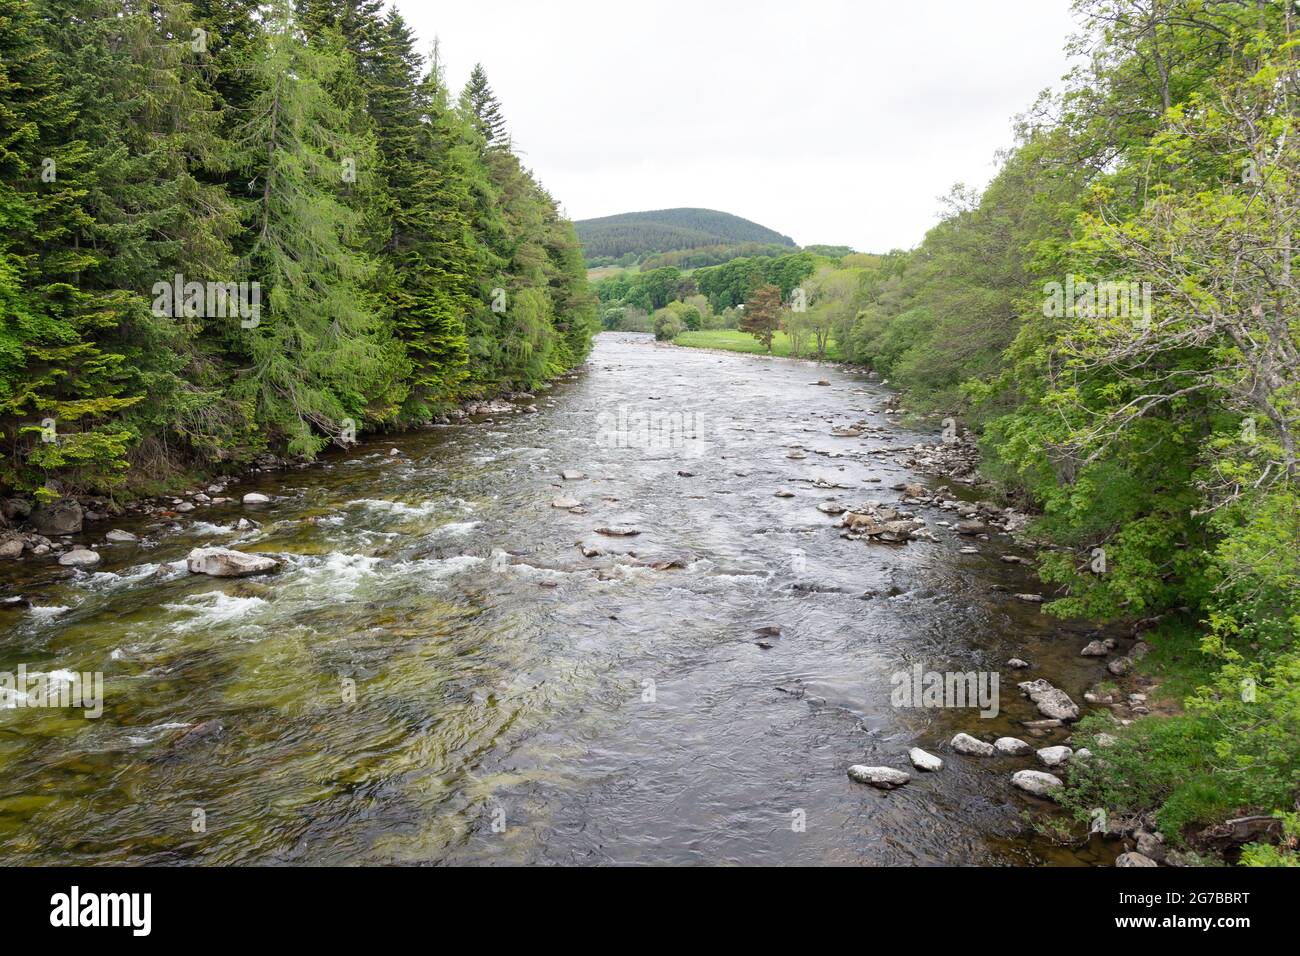 River Dee at entrance to Balmoral Castle and Gardens, Royal Deeside, Aberdeenshire, Scotland, United Kingdom Stock Photo